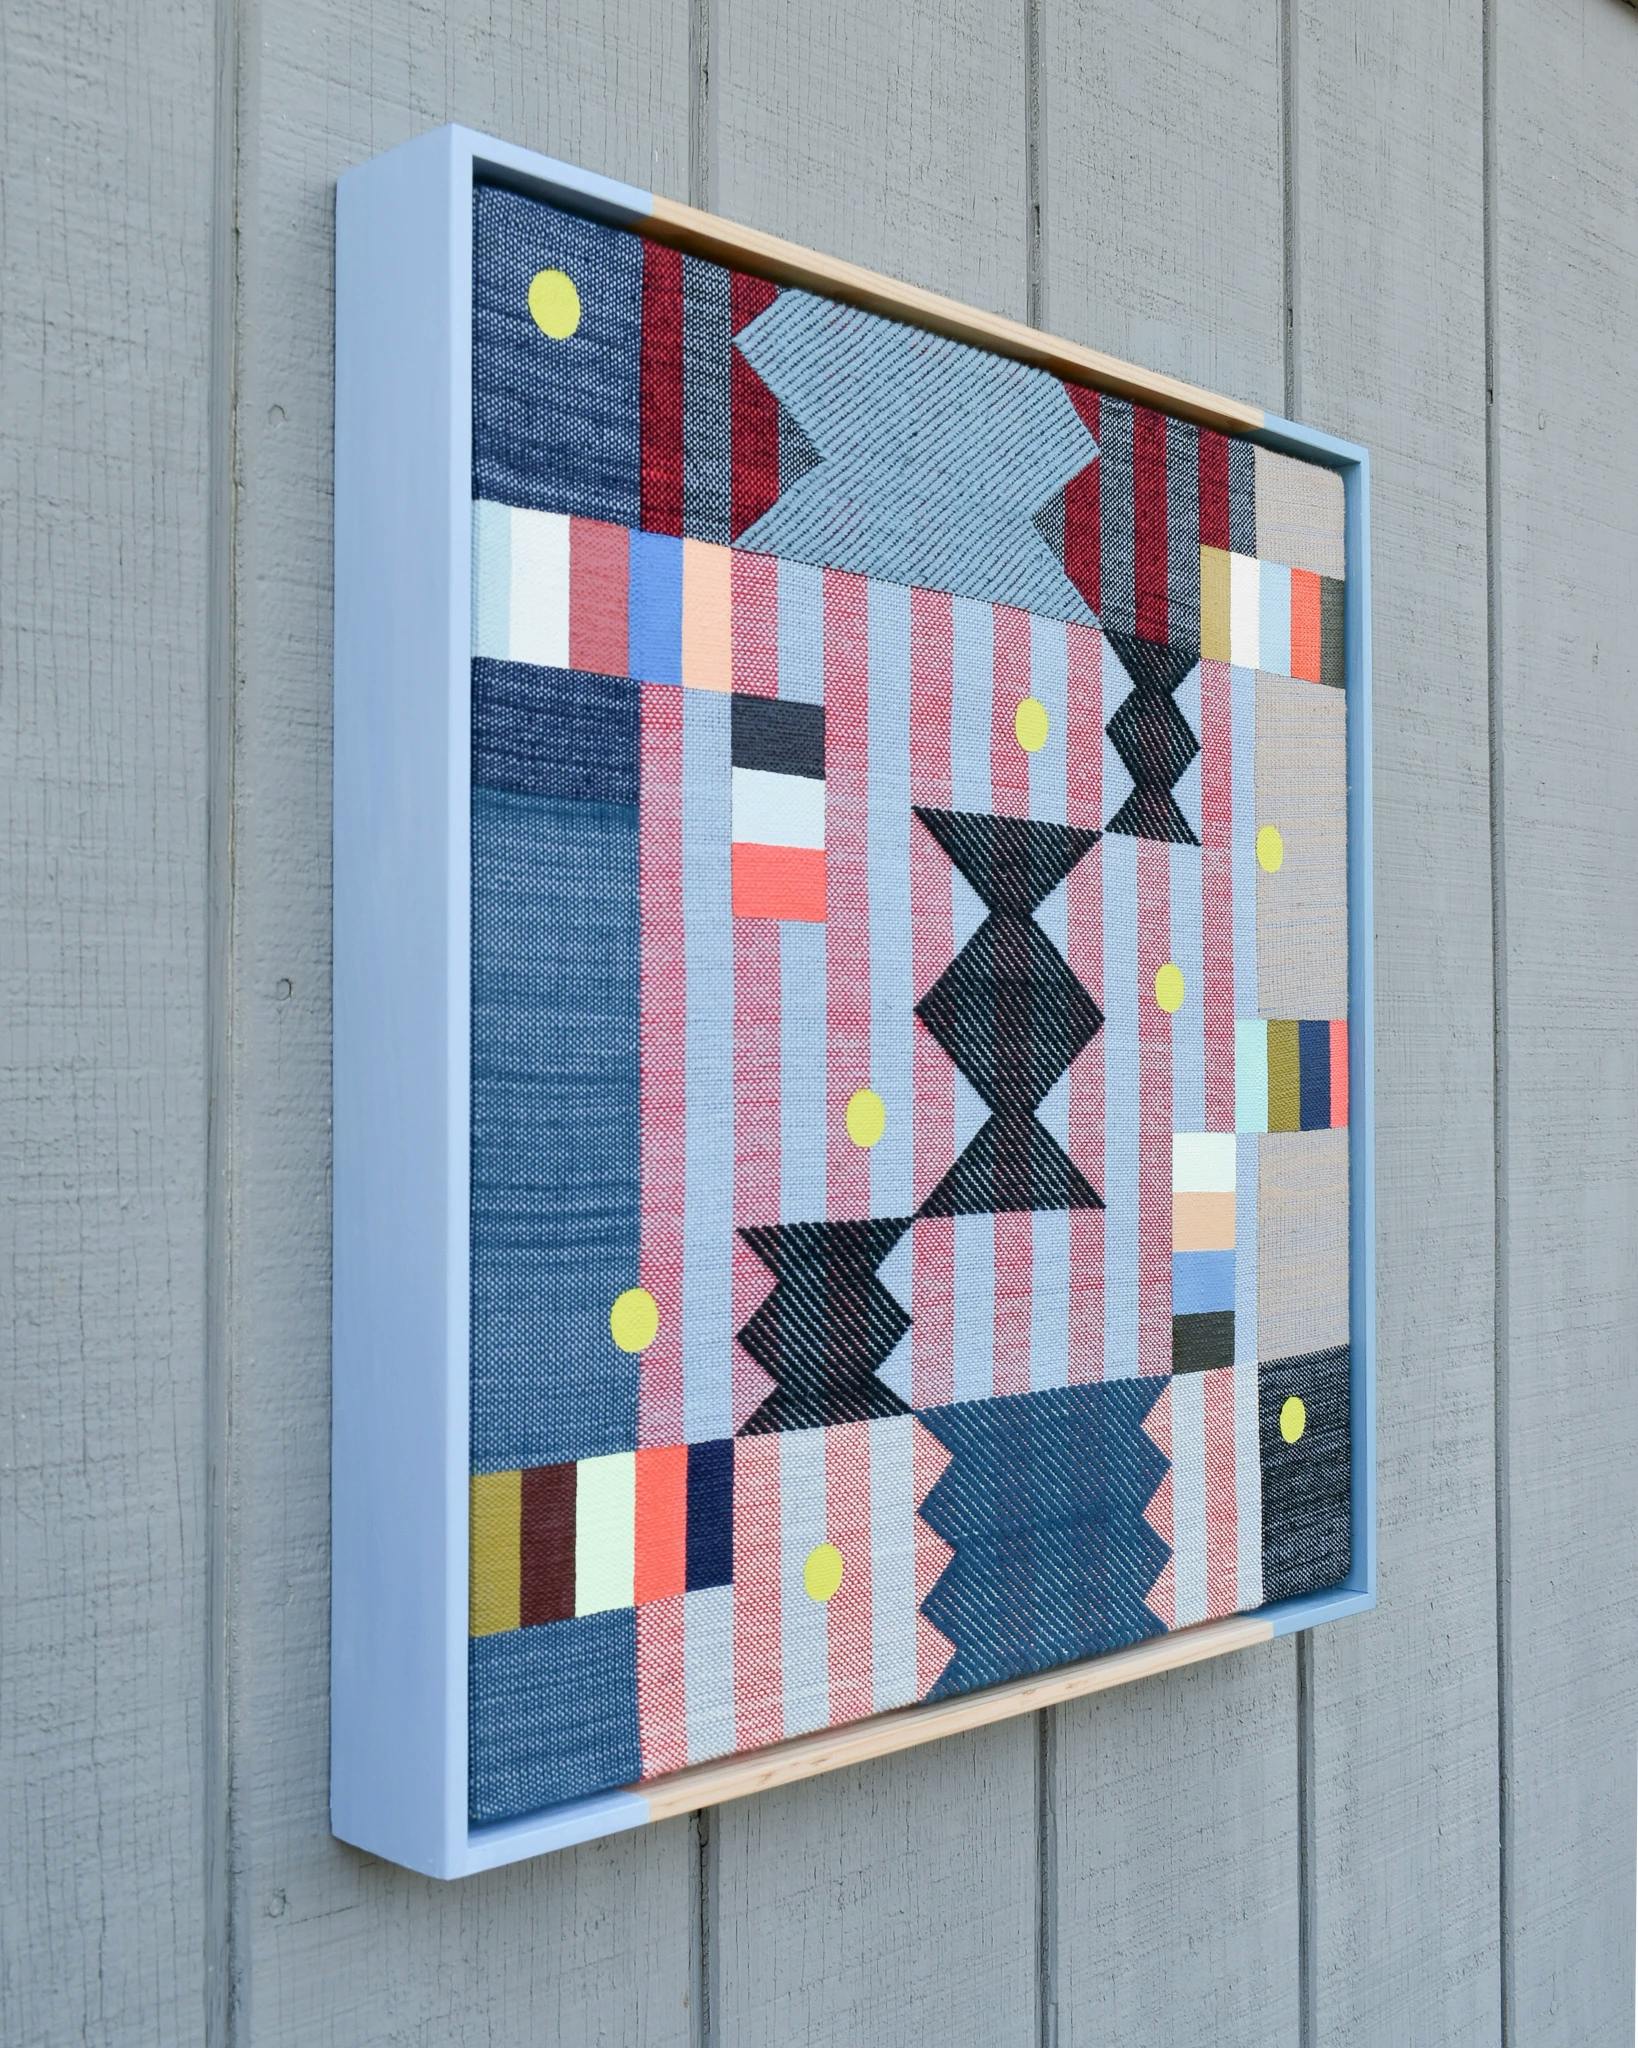 Multicolored acrylic painting on handwoven textiles in a hand-painted frame by artist Sarah Sullivan Sherrod.